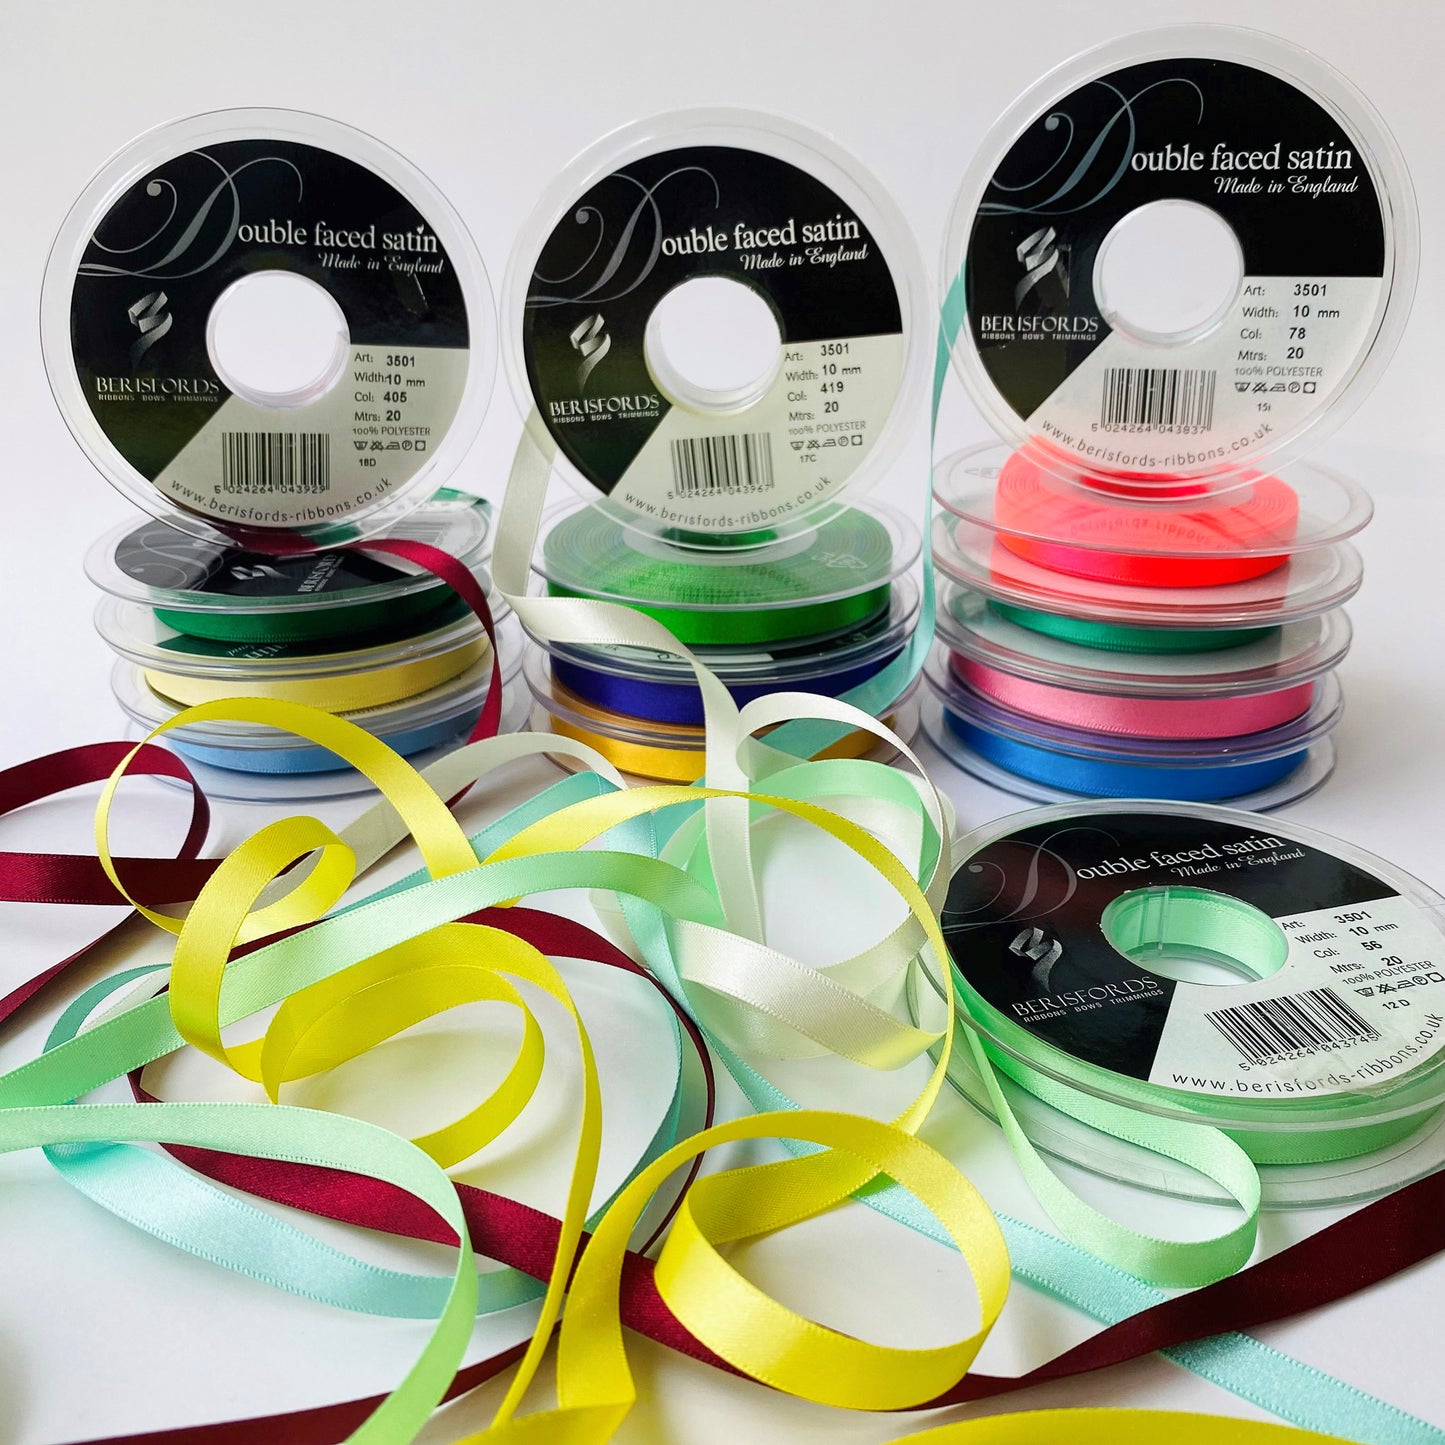 10mm Double Faced Satin Ribbon - 20m roll